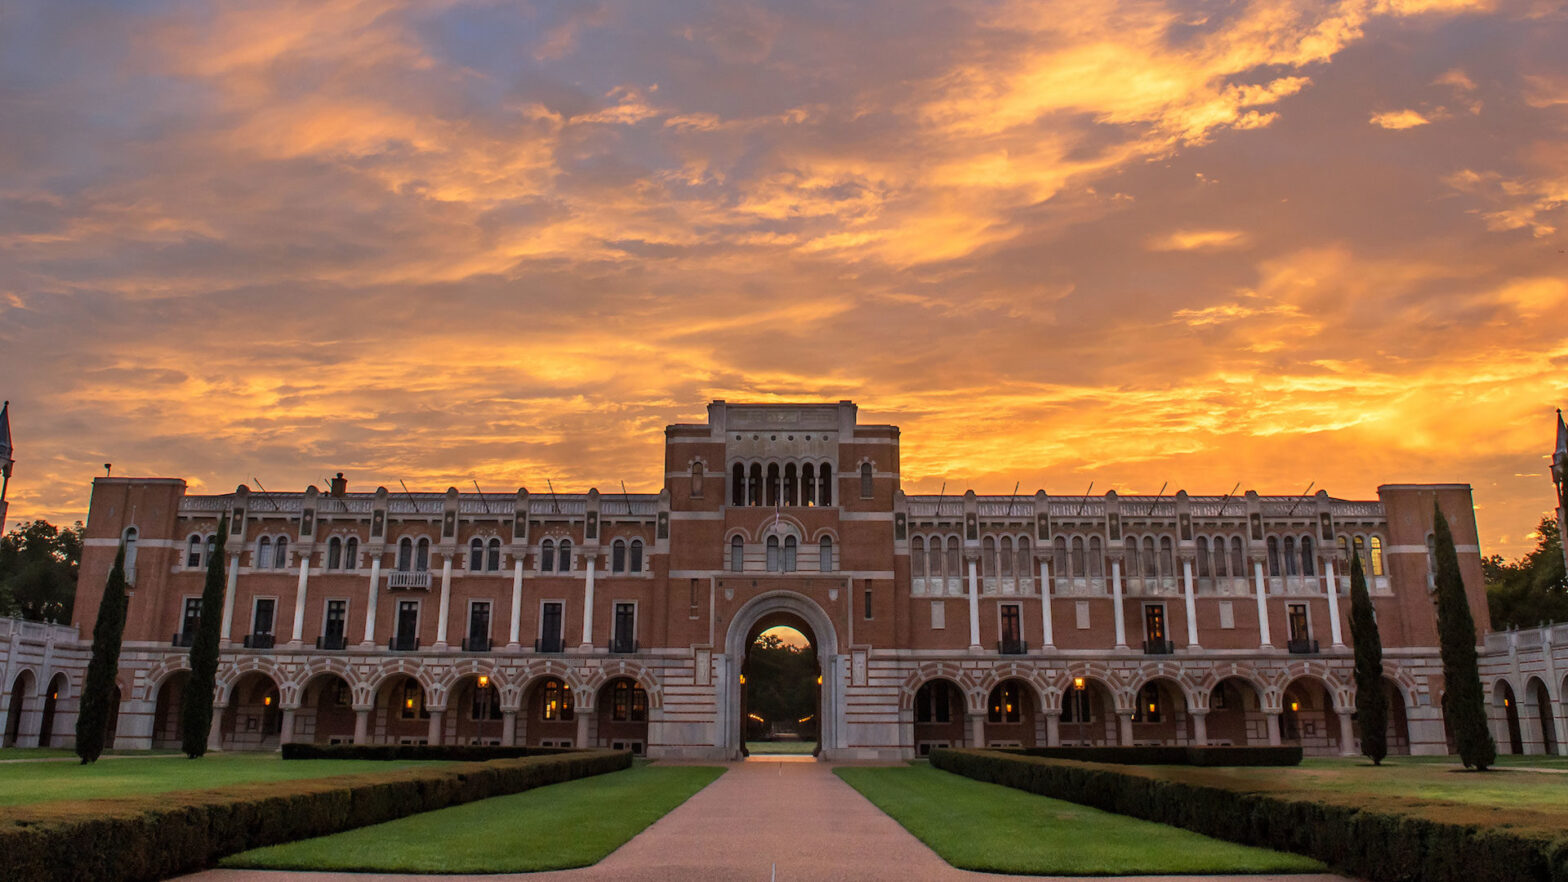 Onit CEO Eric Elfman to Judge the 2019 Rice University Business Plan Competition